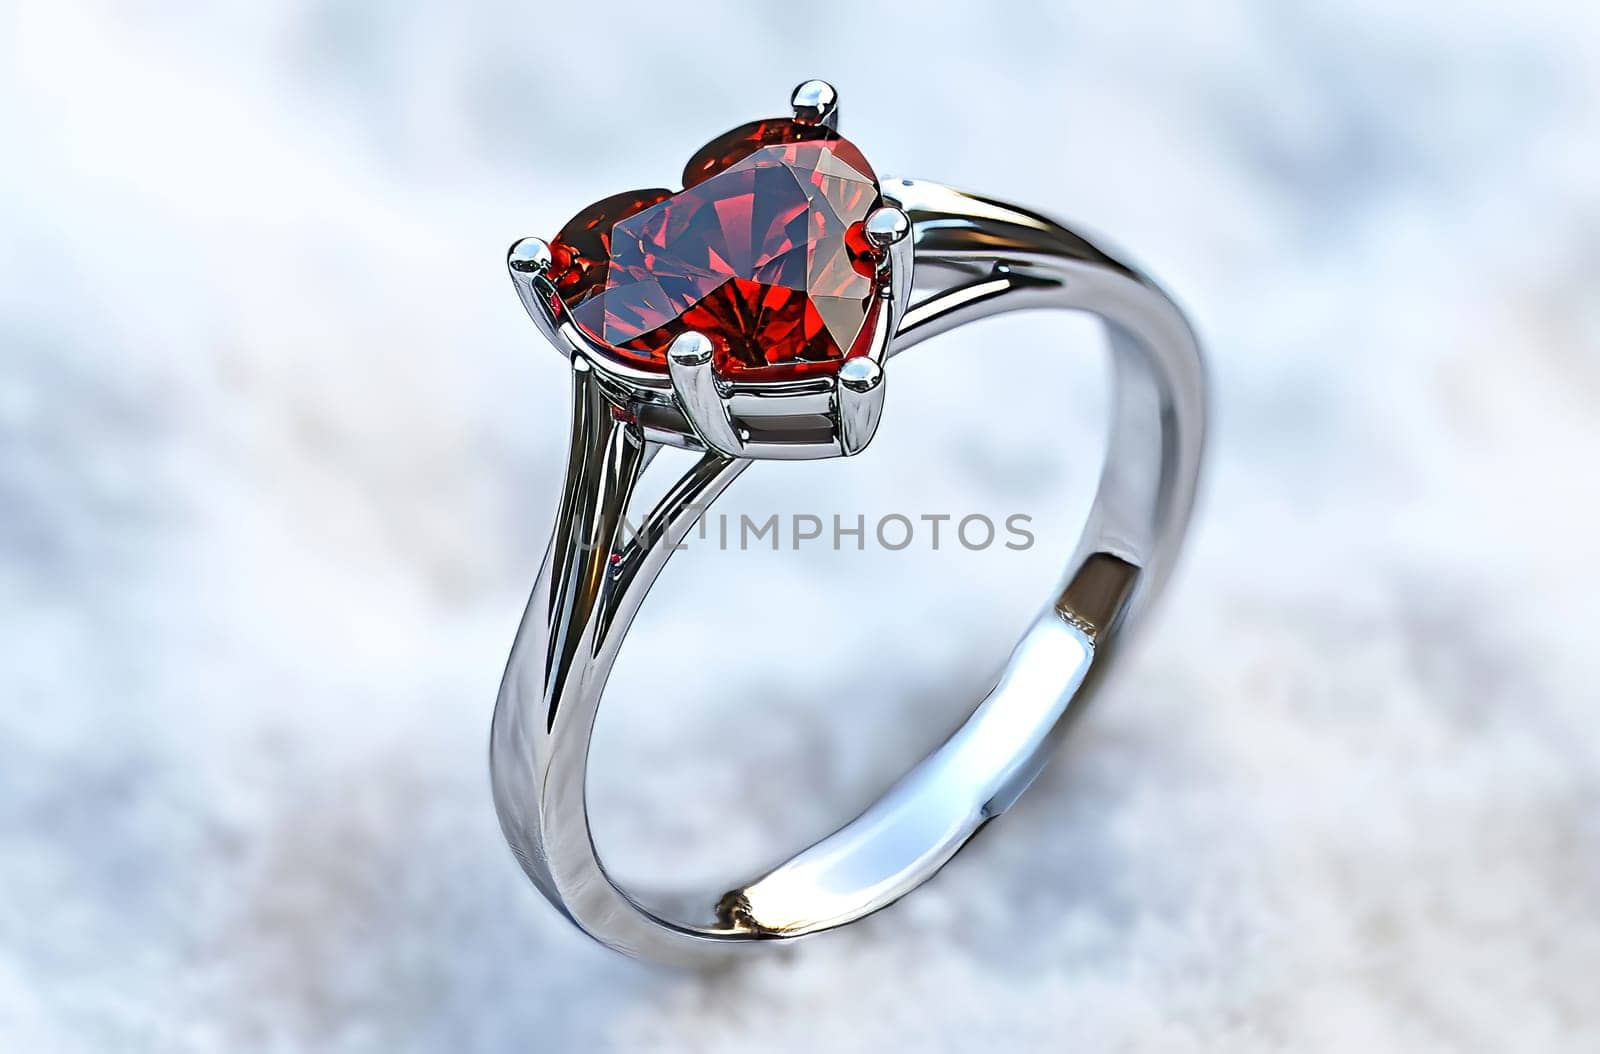 Red Heart Shaped Ring on White Surface by gcm